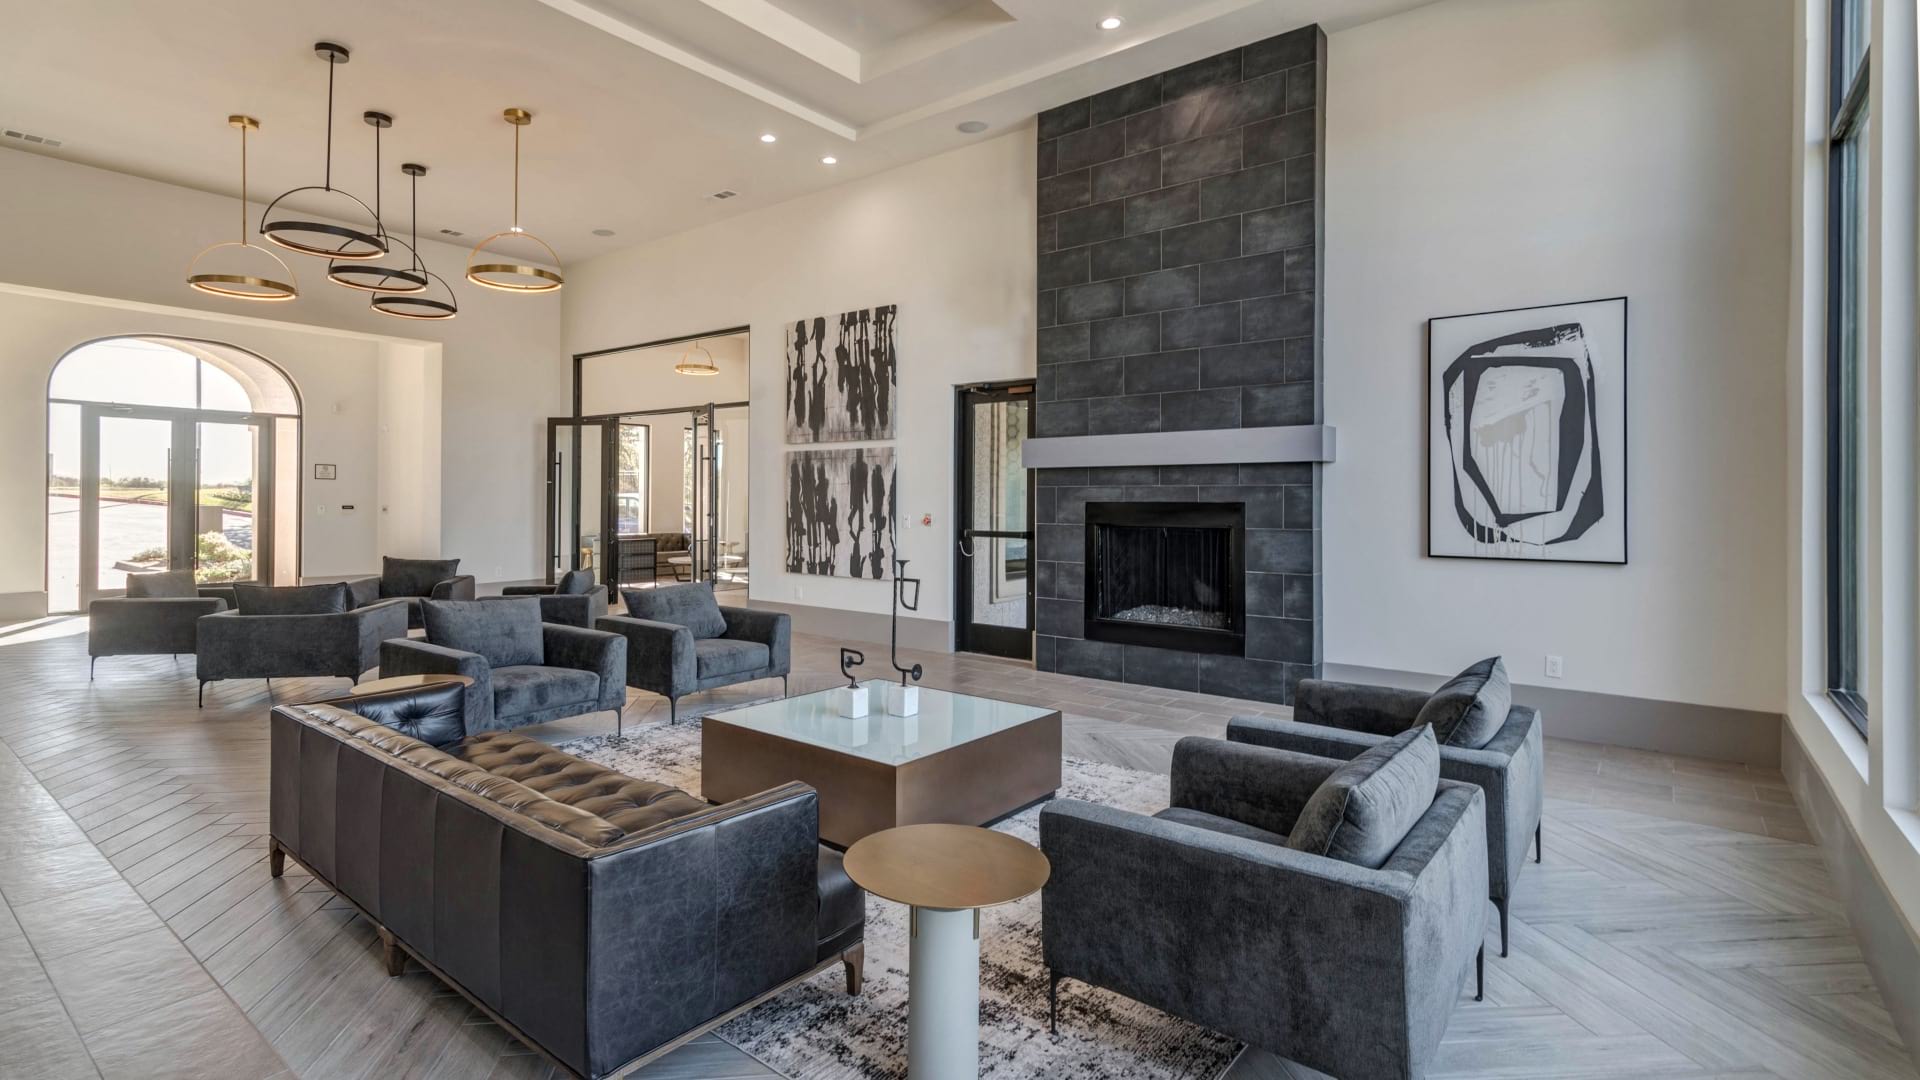 Cortland Bear Creek resident clubhouse with modern seating and decor